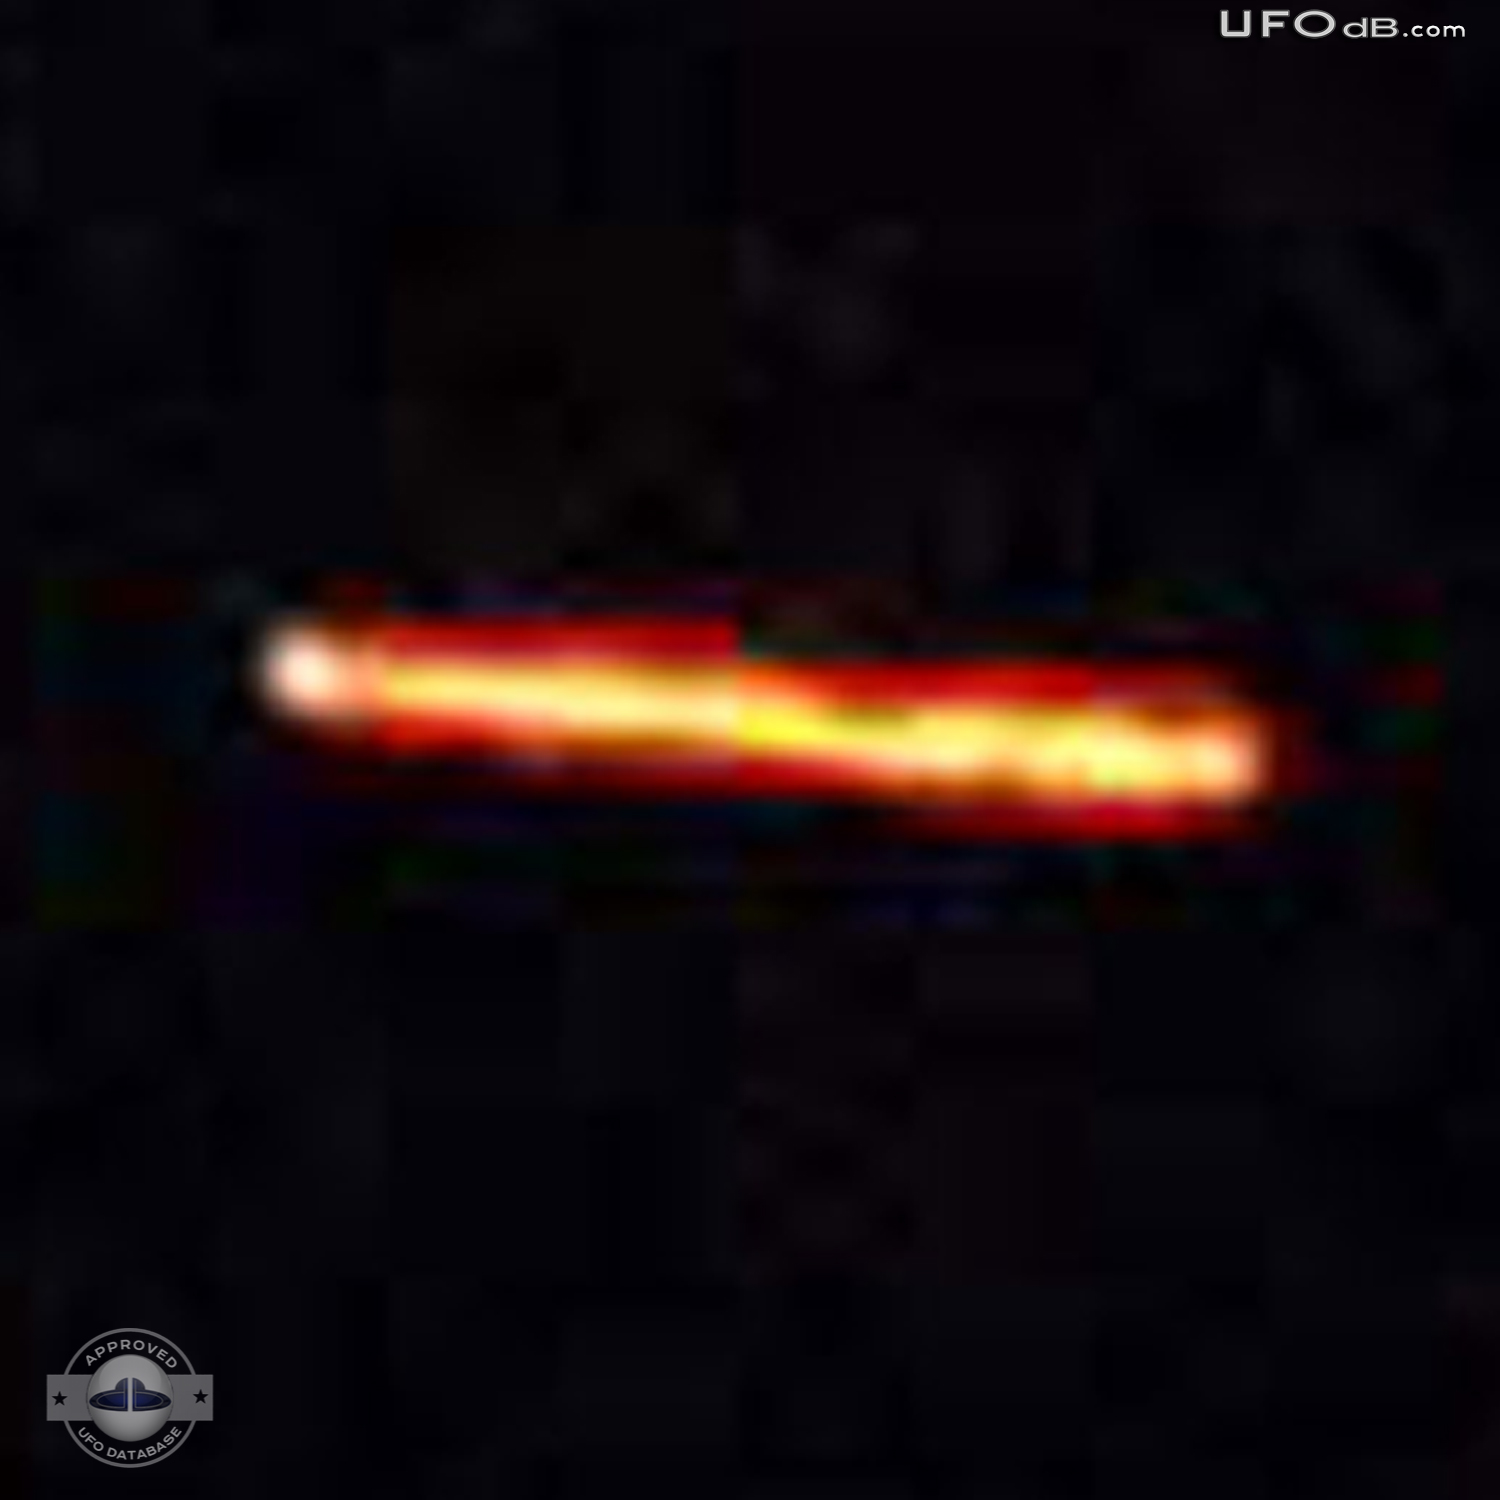 Two orbs UFO over Agimak Lake near Ignace in Ontario Canada, July 2011 UFO Picture #357-4